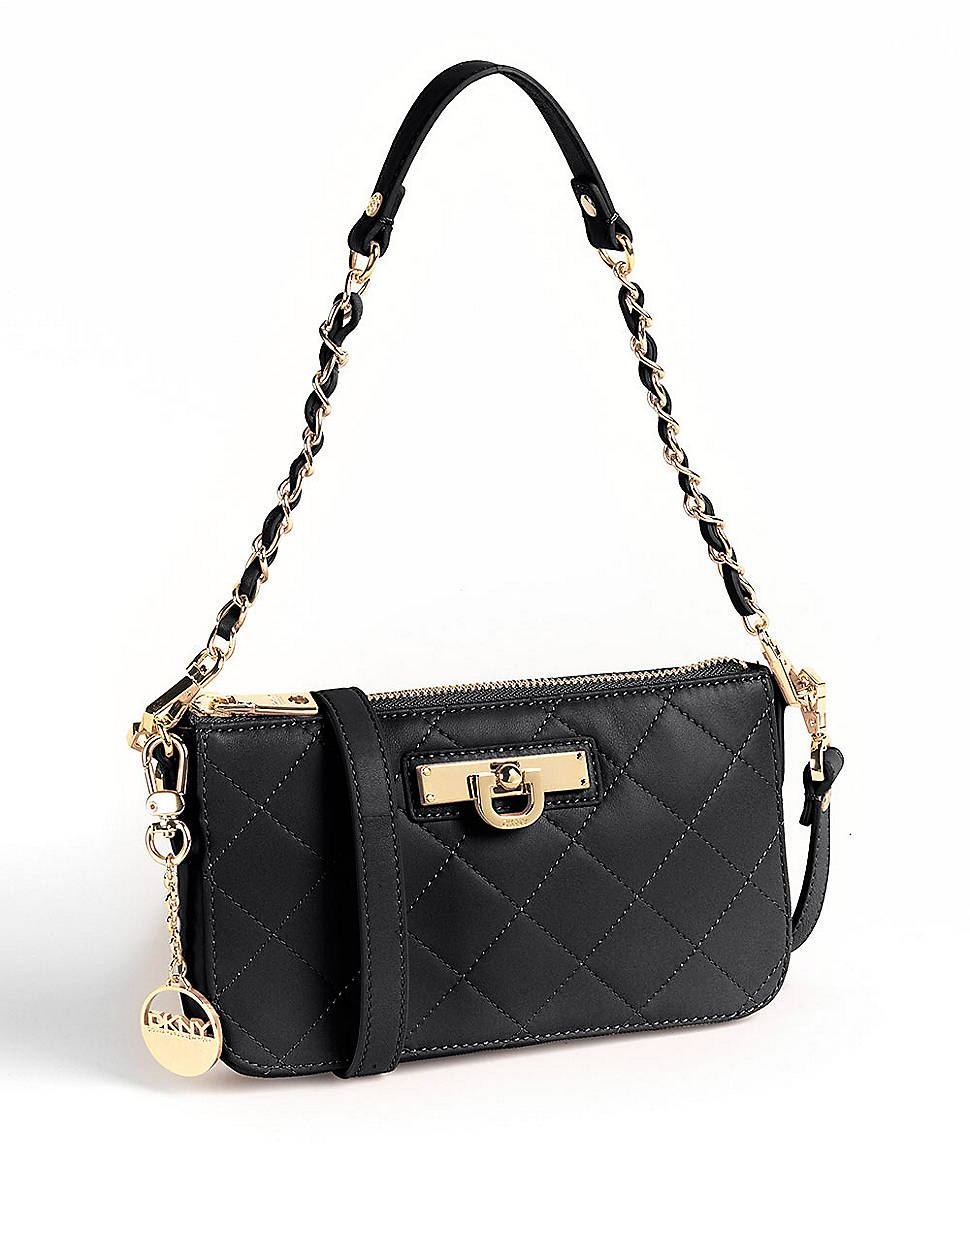 Dkny Nappa Convertible Quilted Leather Clutch Handbag in Black | Lyst